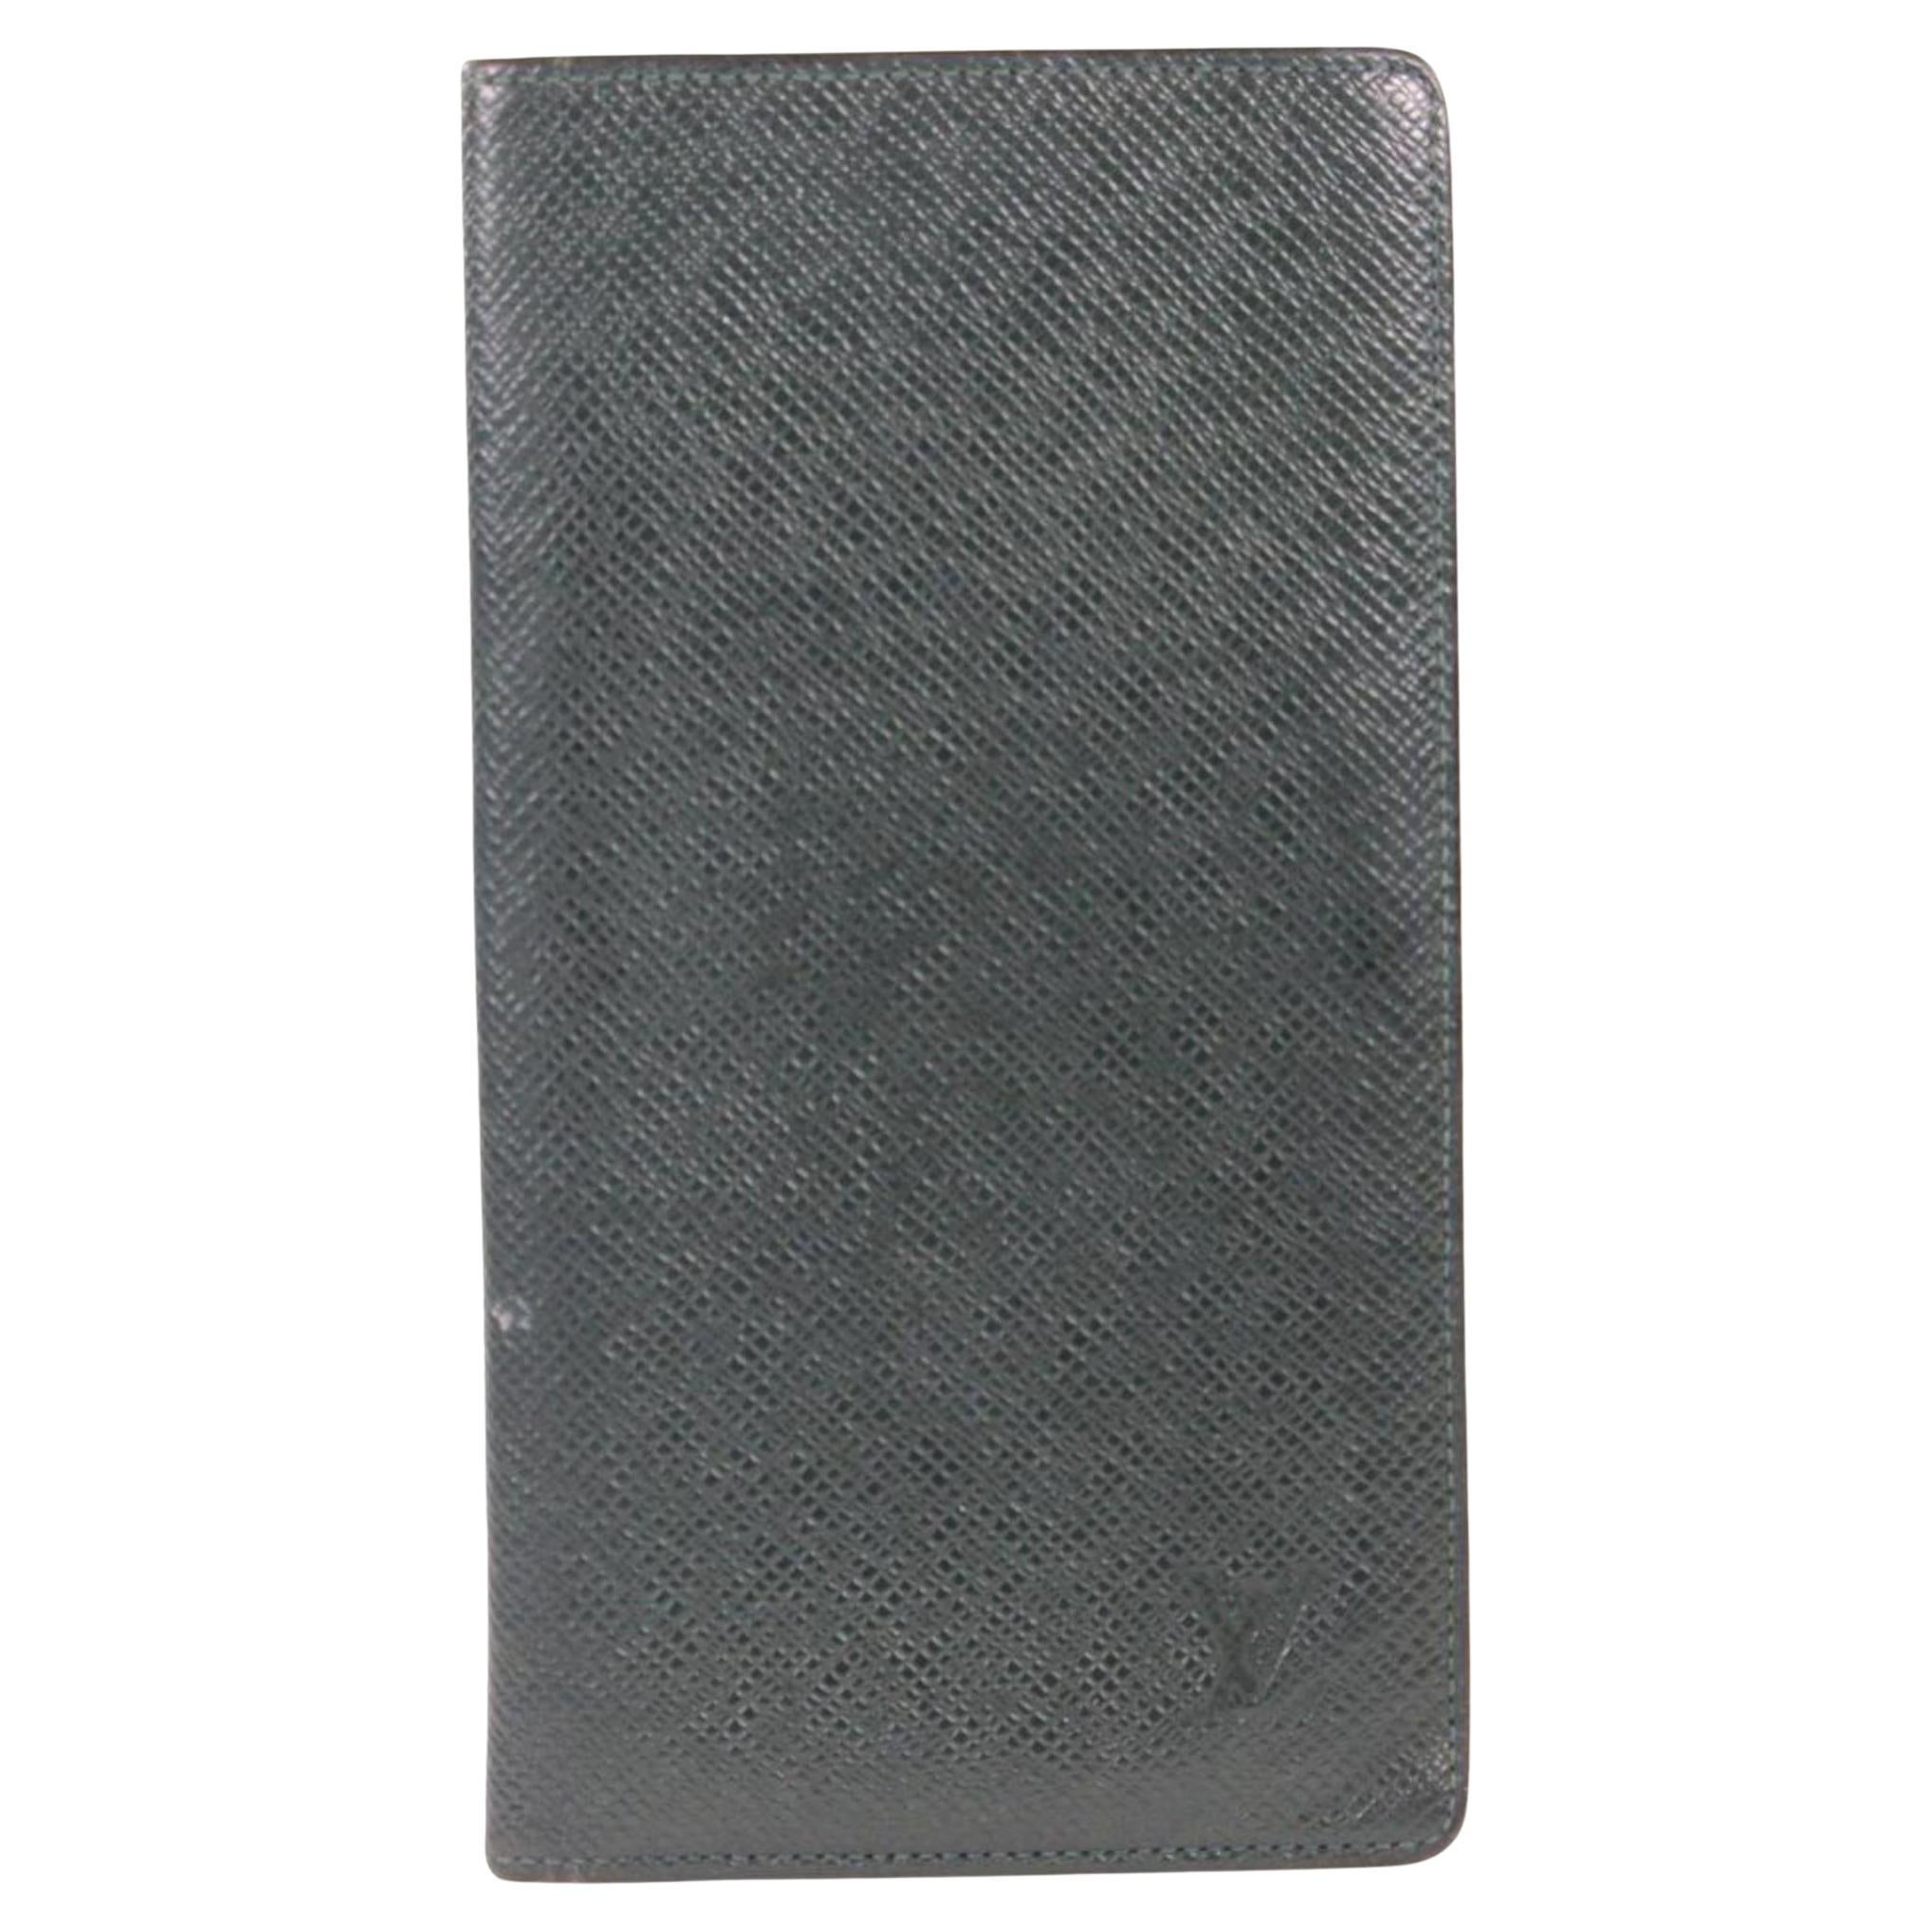 Louis Vuitton Dark Green Taiga Leather Brazza Wallet Long Card Holder 16lv1103 For Sale